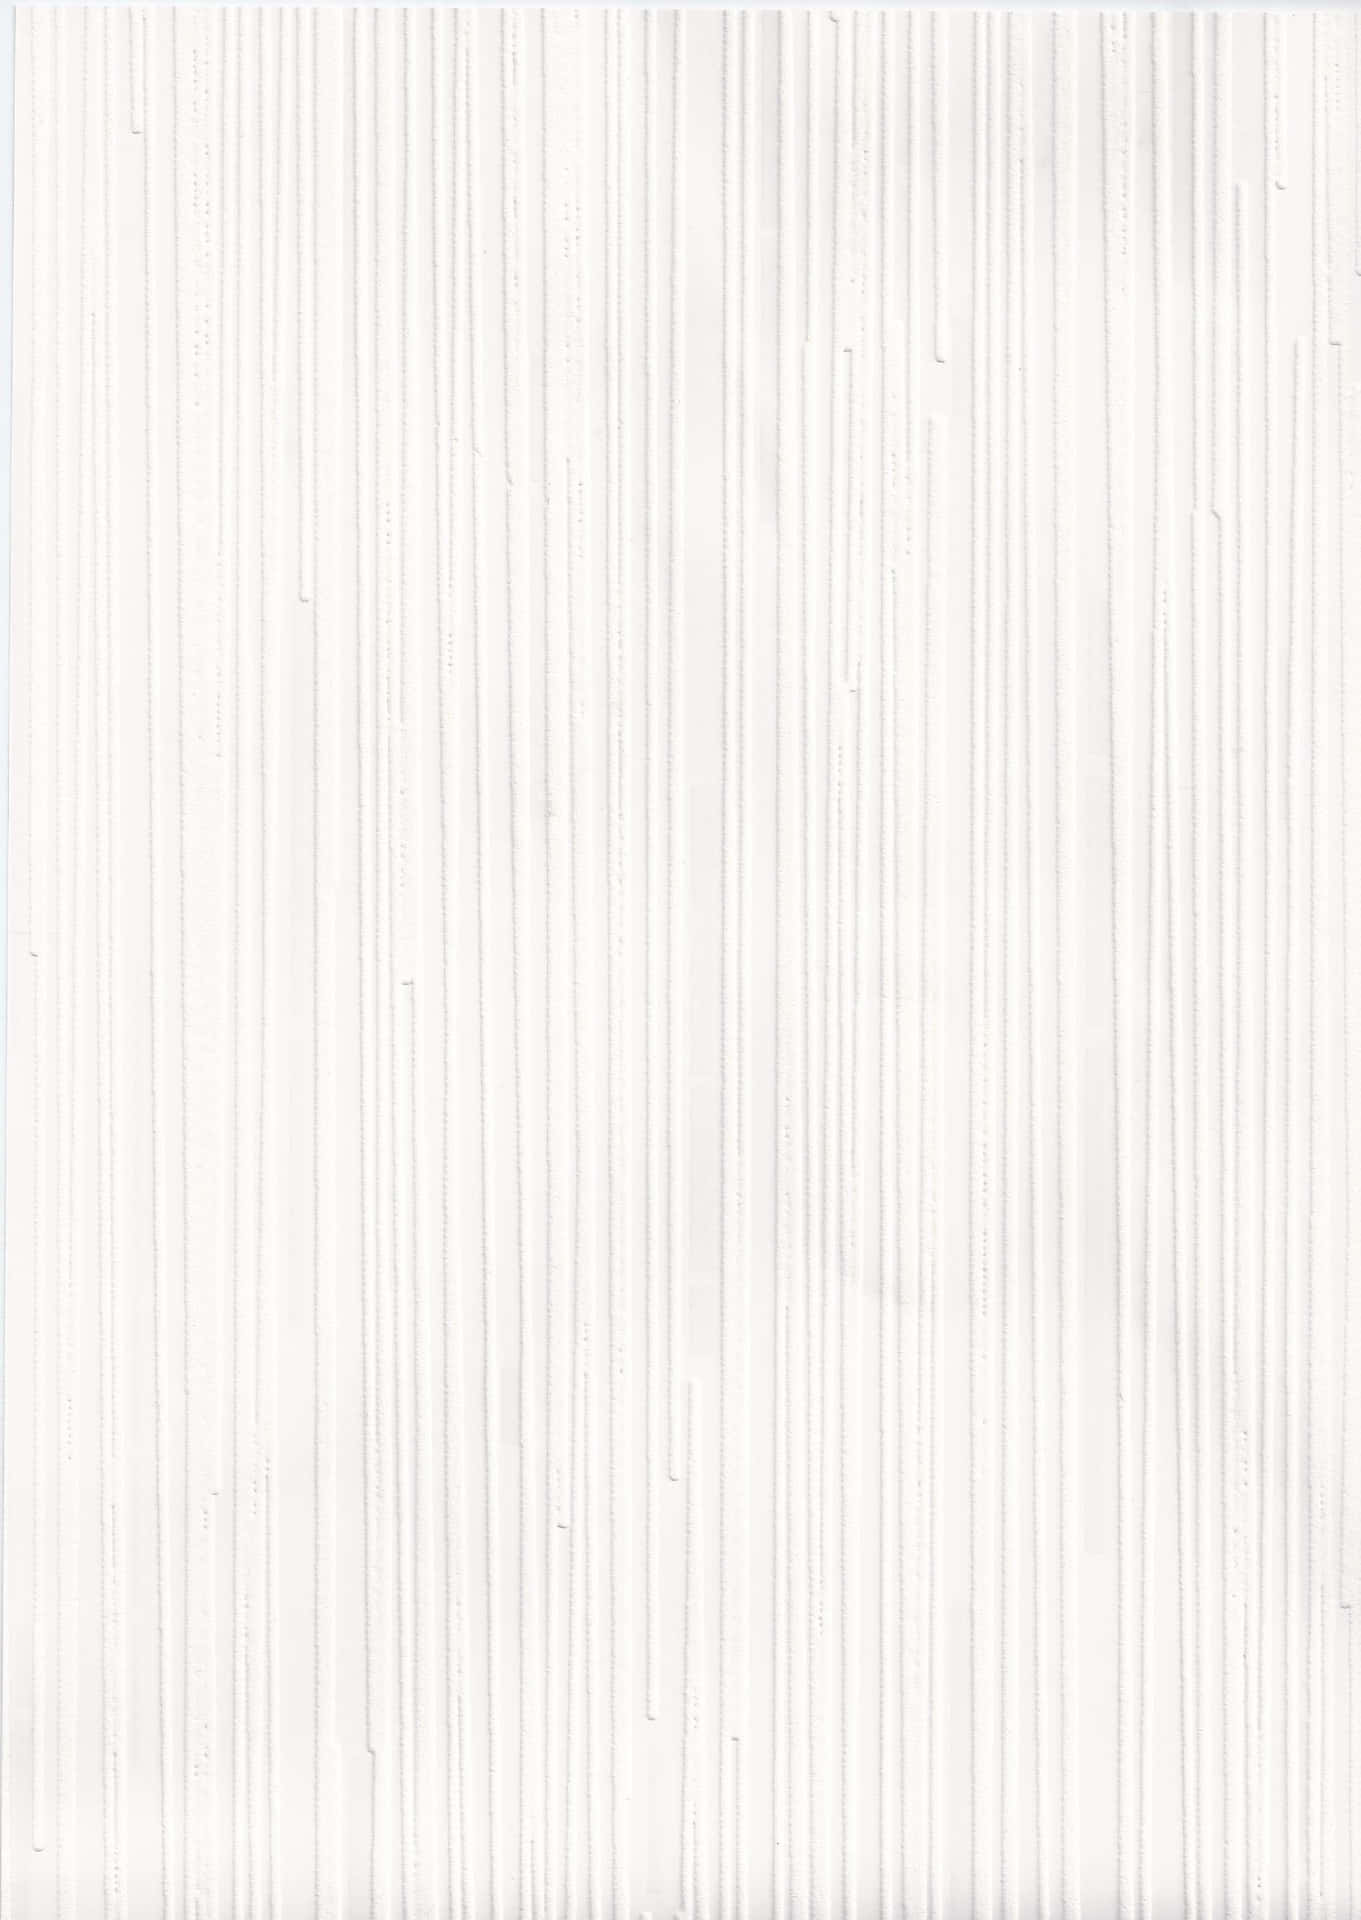 A White Sheet Of Paper With A Pattern On It